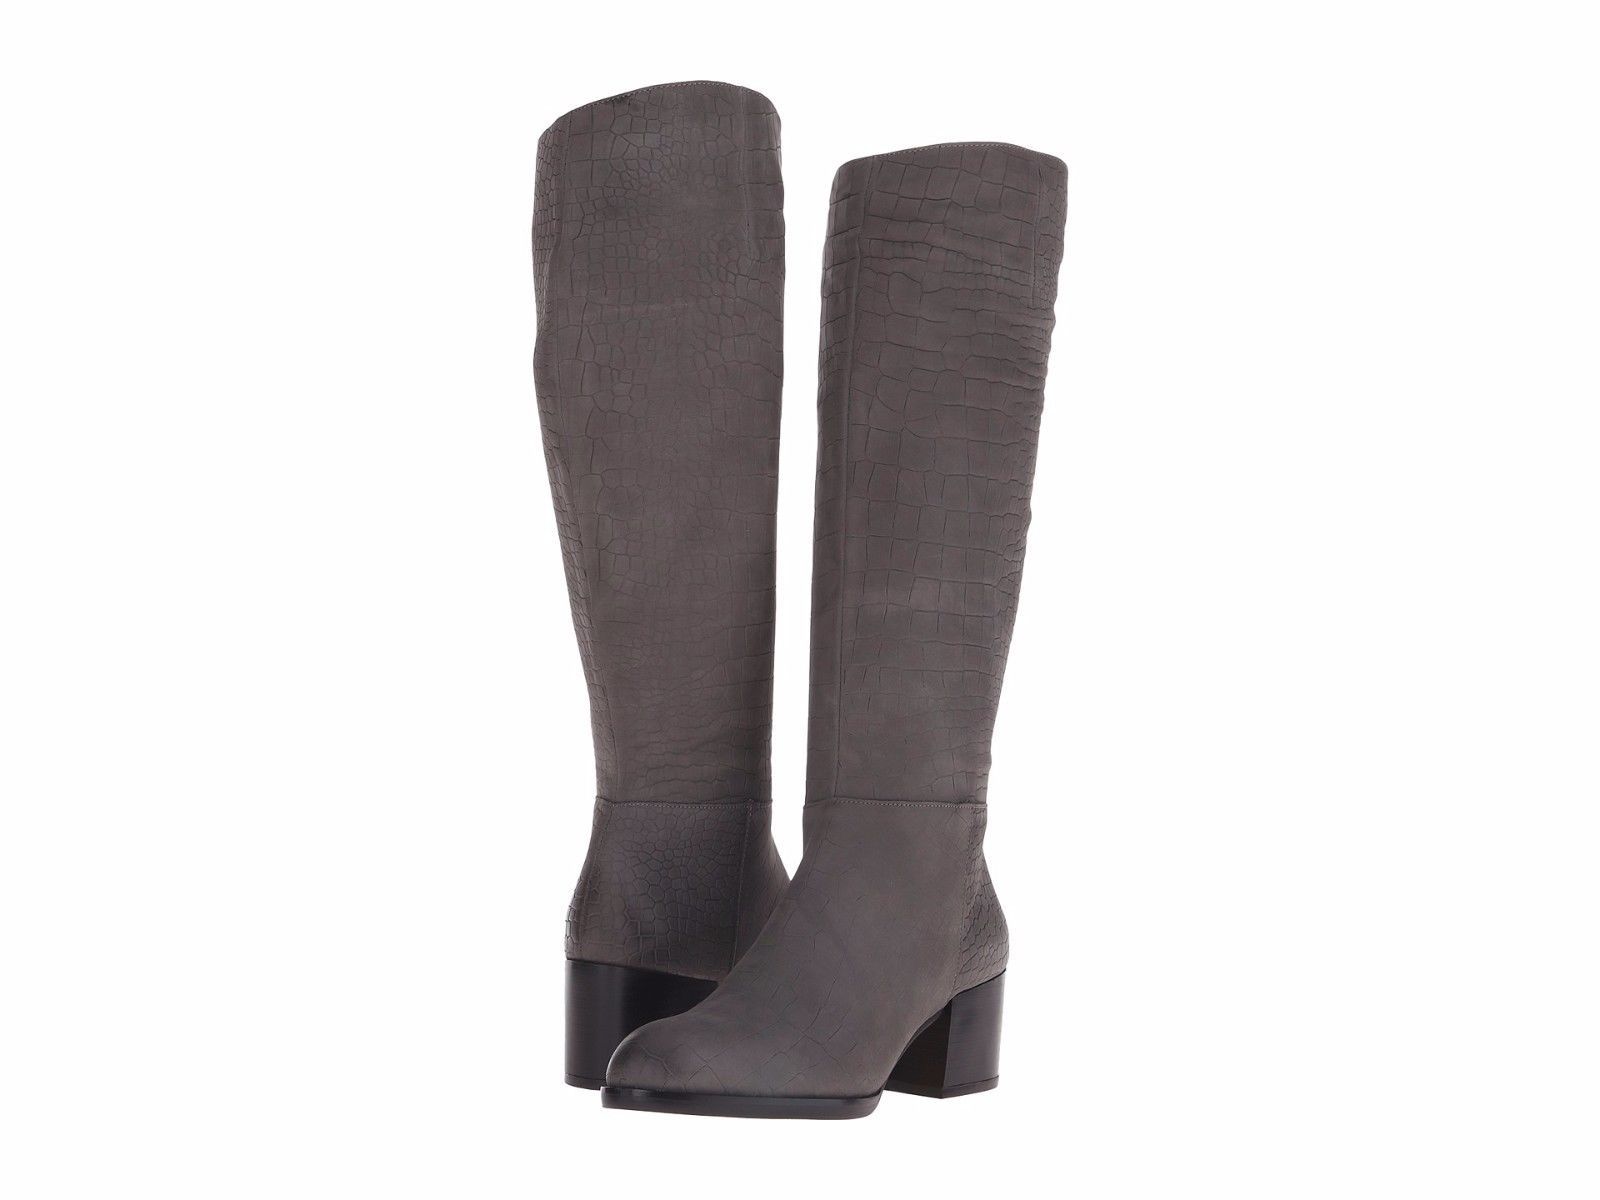 Sam Edelman Boots Joelle Grey Tall Knee High Heeled Leather Riding Boots 6 $250 - $93.47